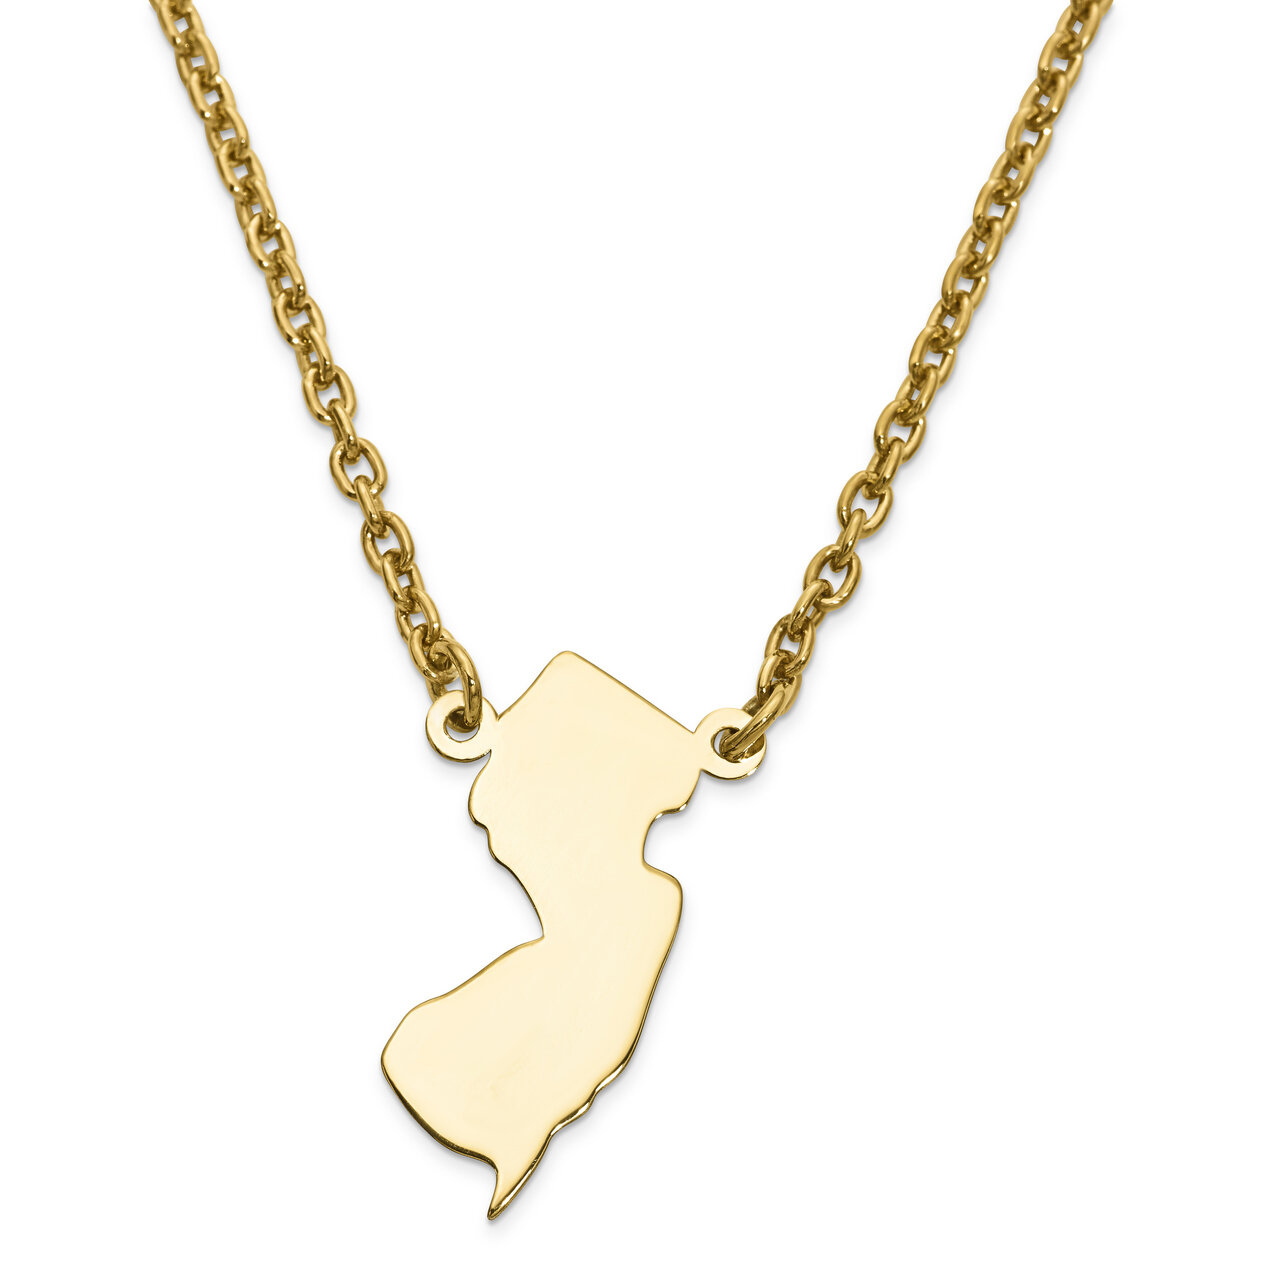 New Jersey State Pendant Necklace with Chain 14k Yellow Gold Engravable XNA706Y-NJ